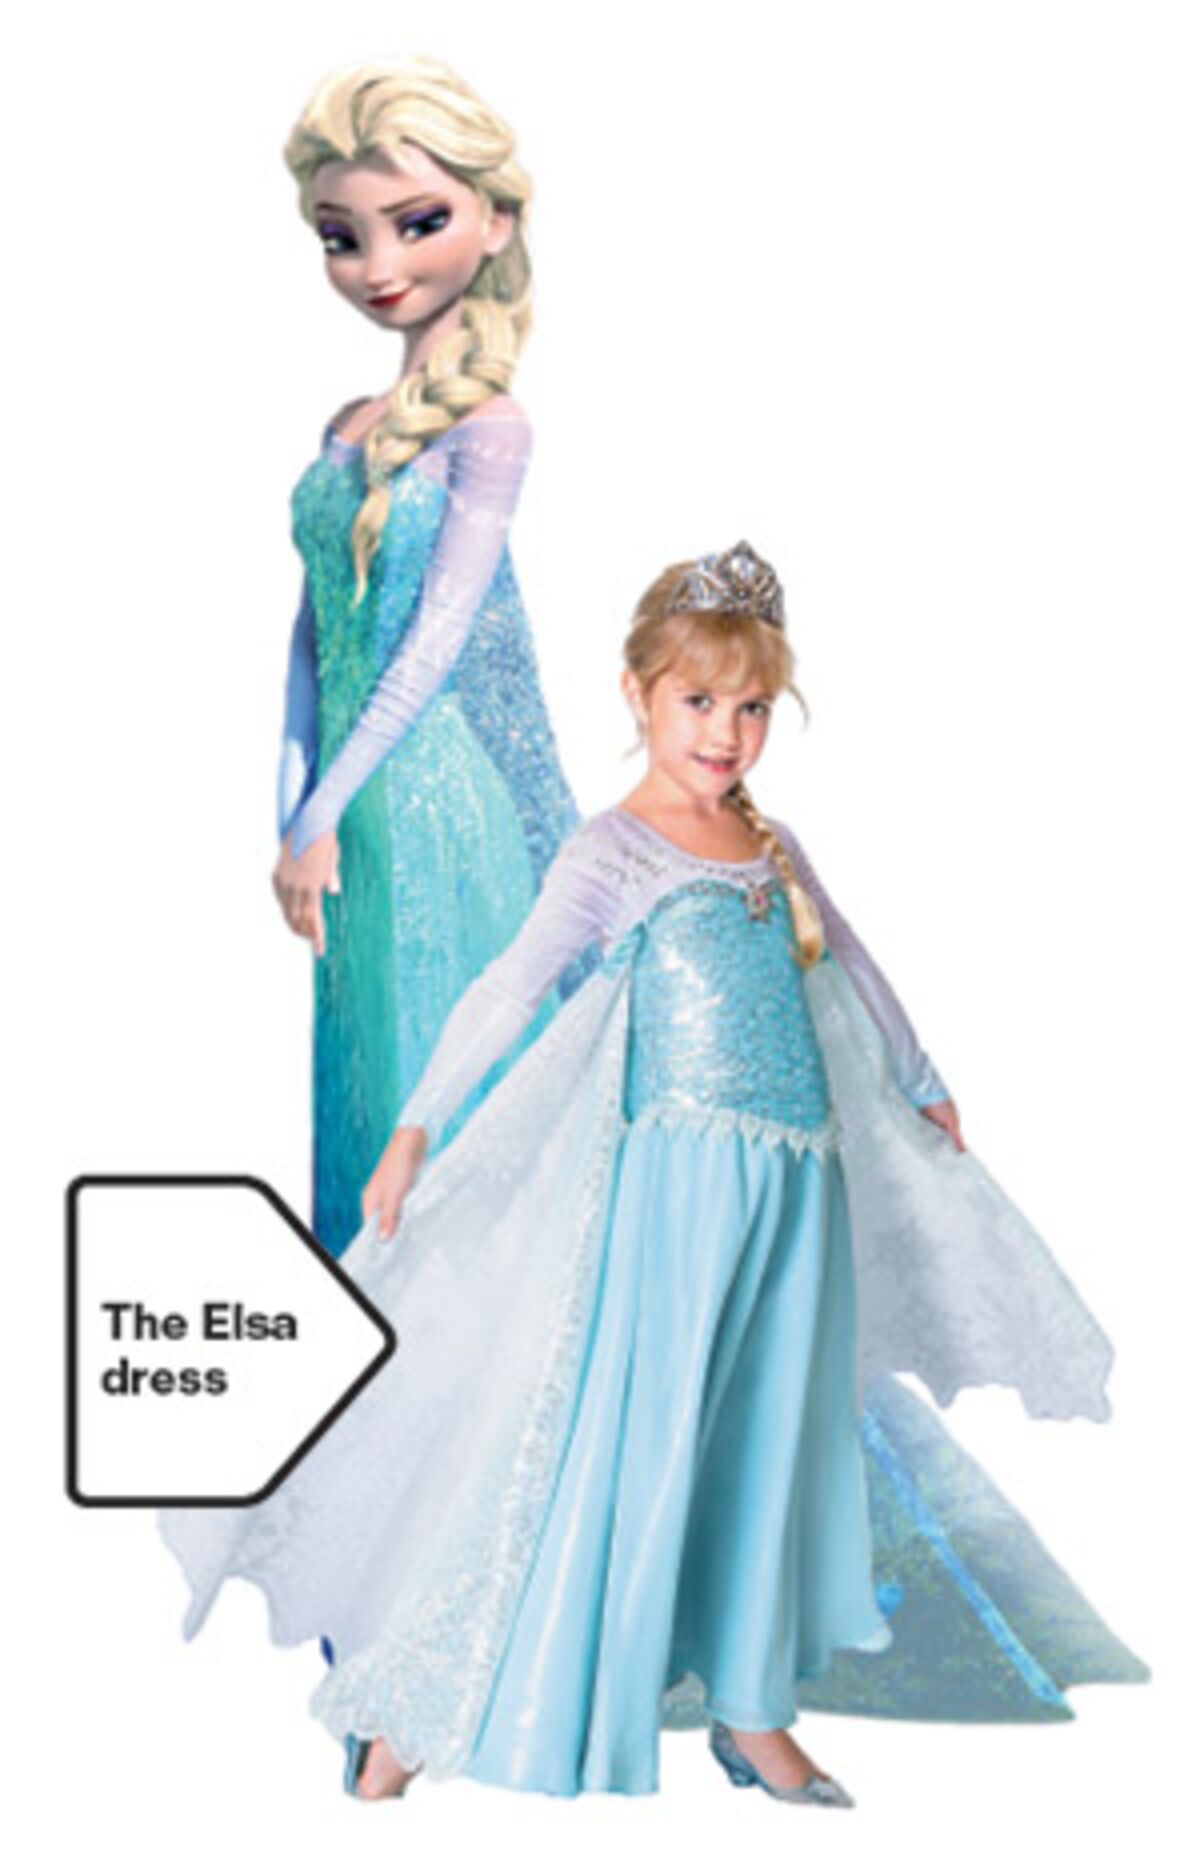 Elsa's Frozen Dress: The Hottest Gown in Town - Bloomberg